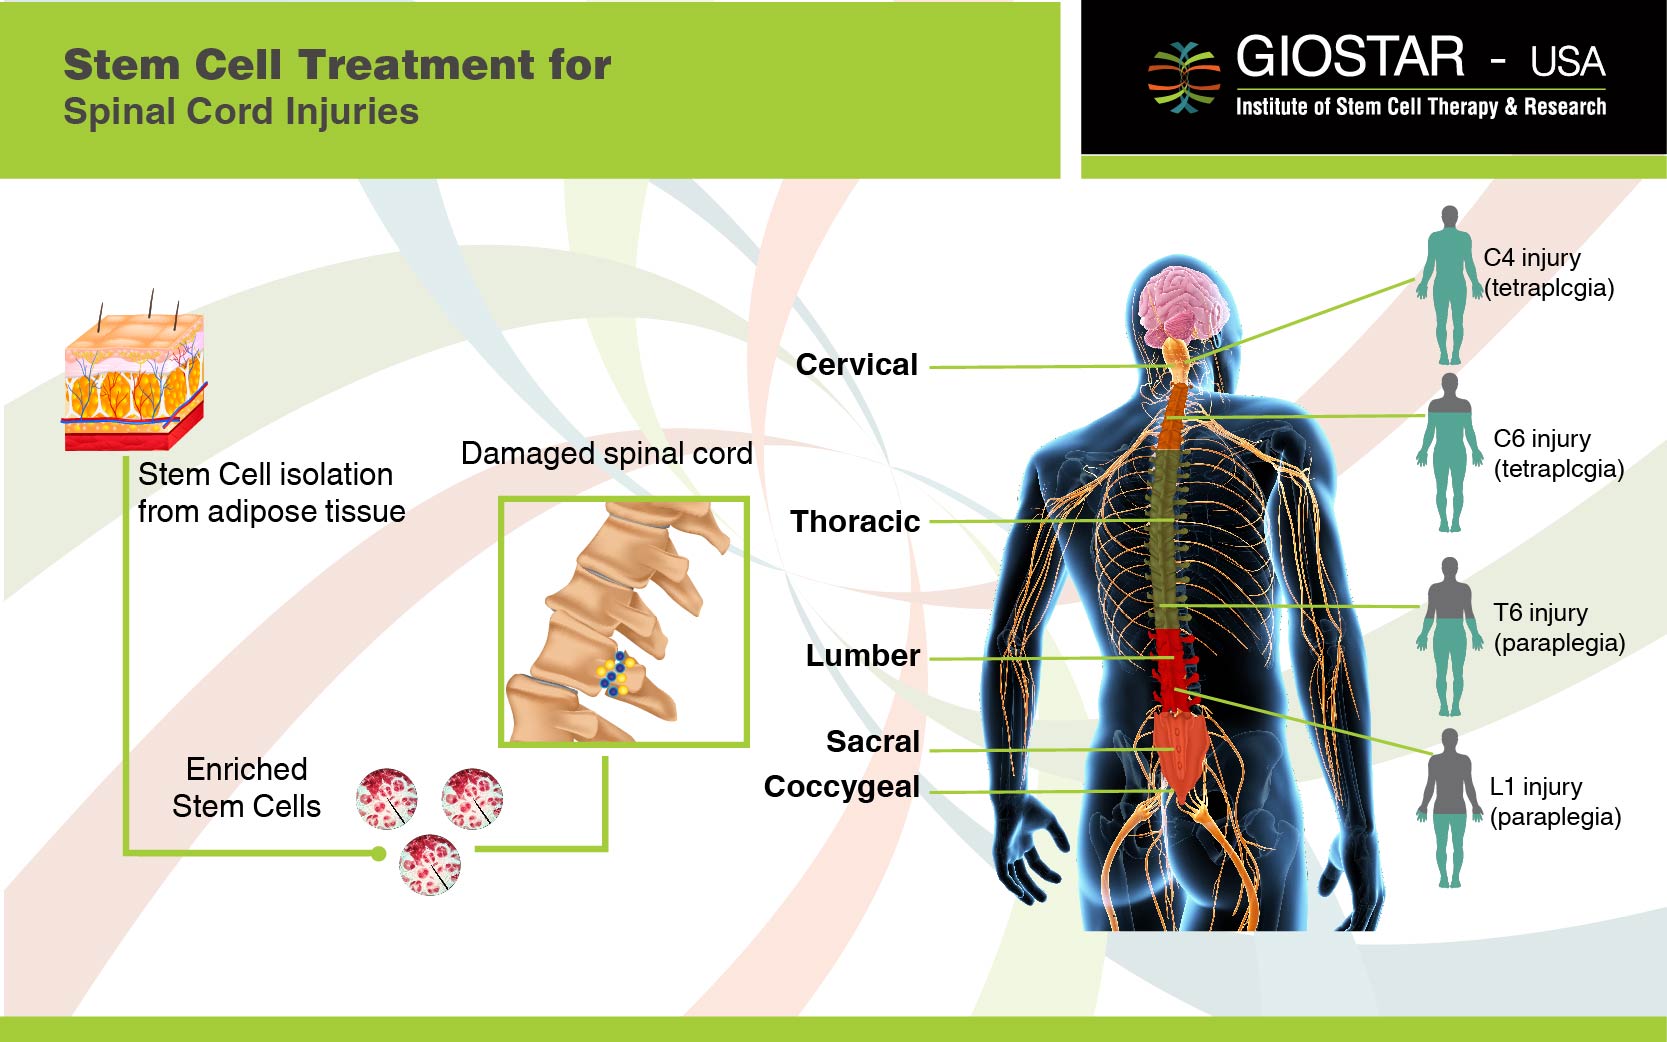 Stem Cell Treatment for Spinal Cord Injuries